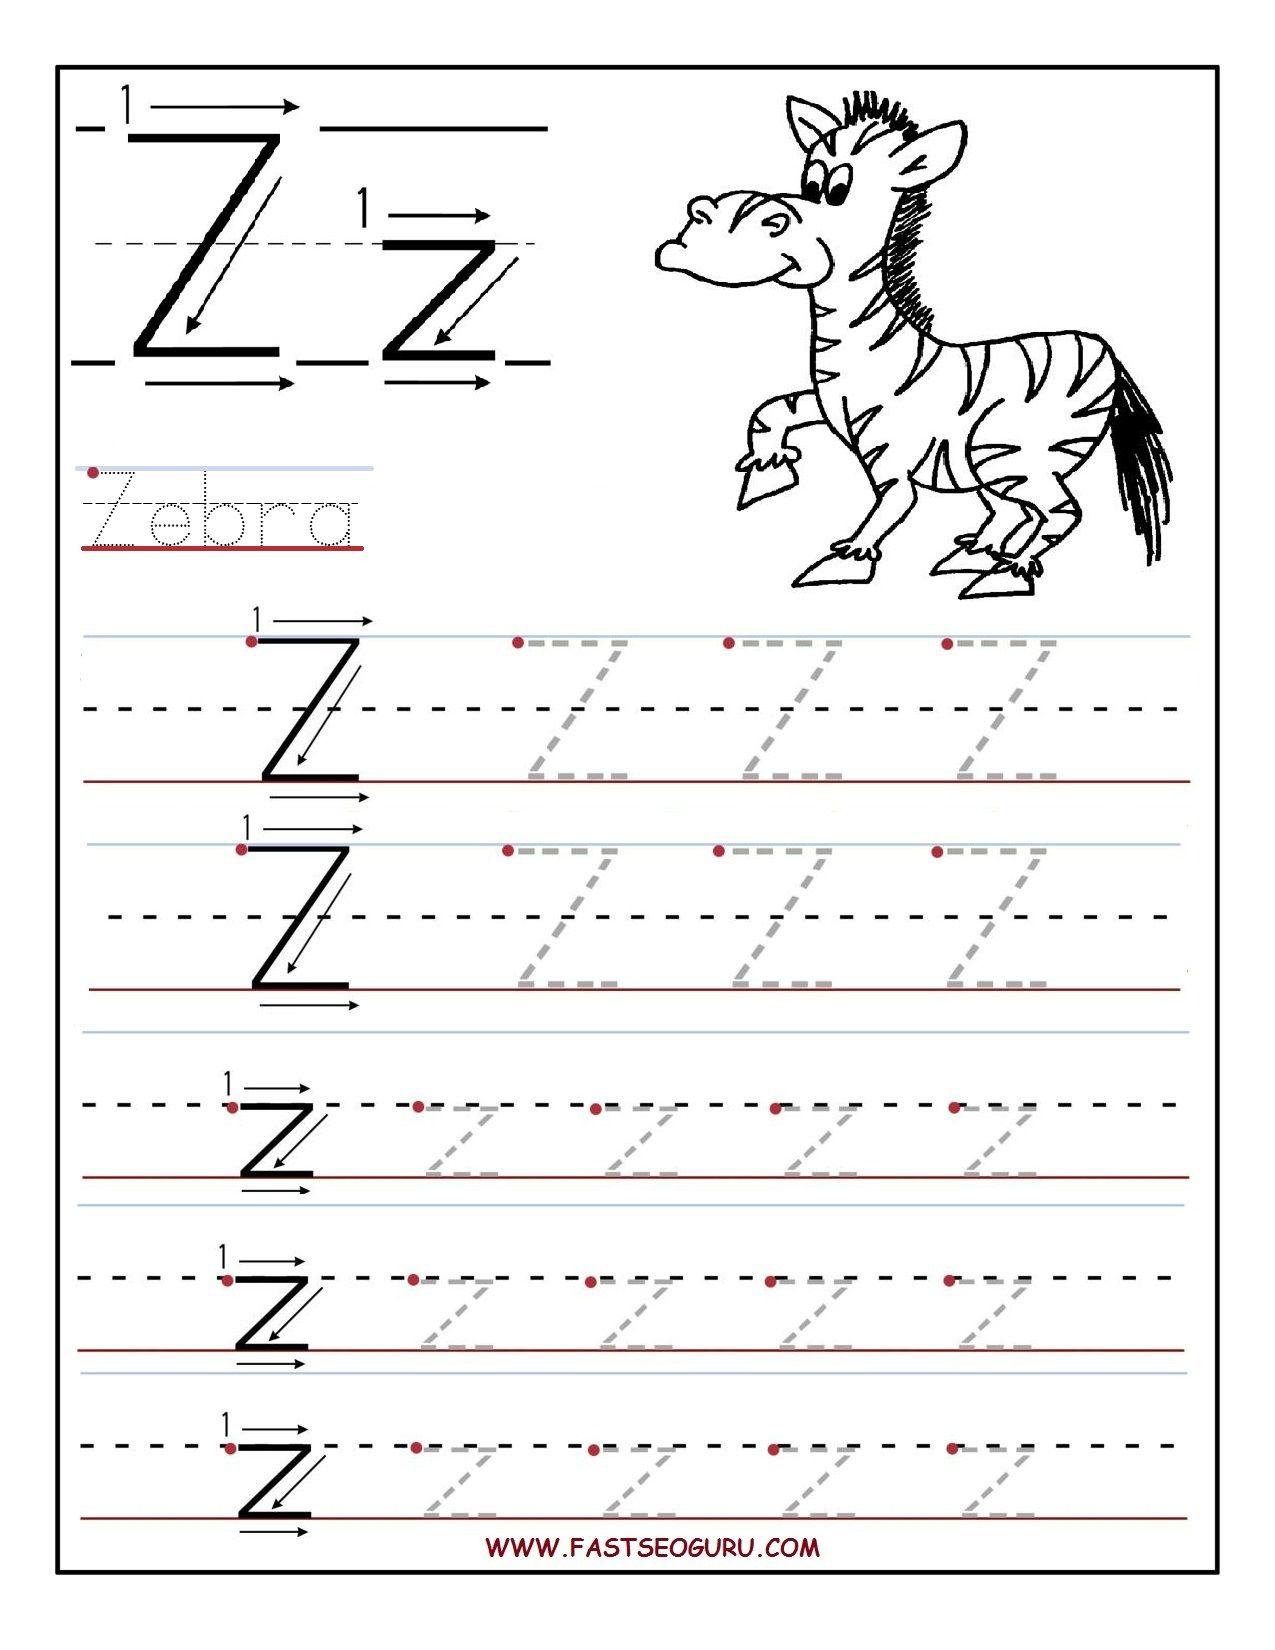 Pinvilfran Gason On Decor | Letter Tracing Worksheets throughout Letter Z Worksheets For Toddlers